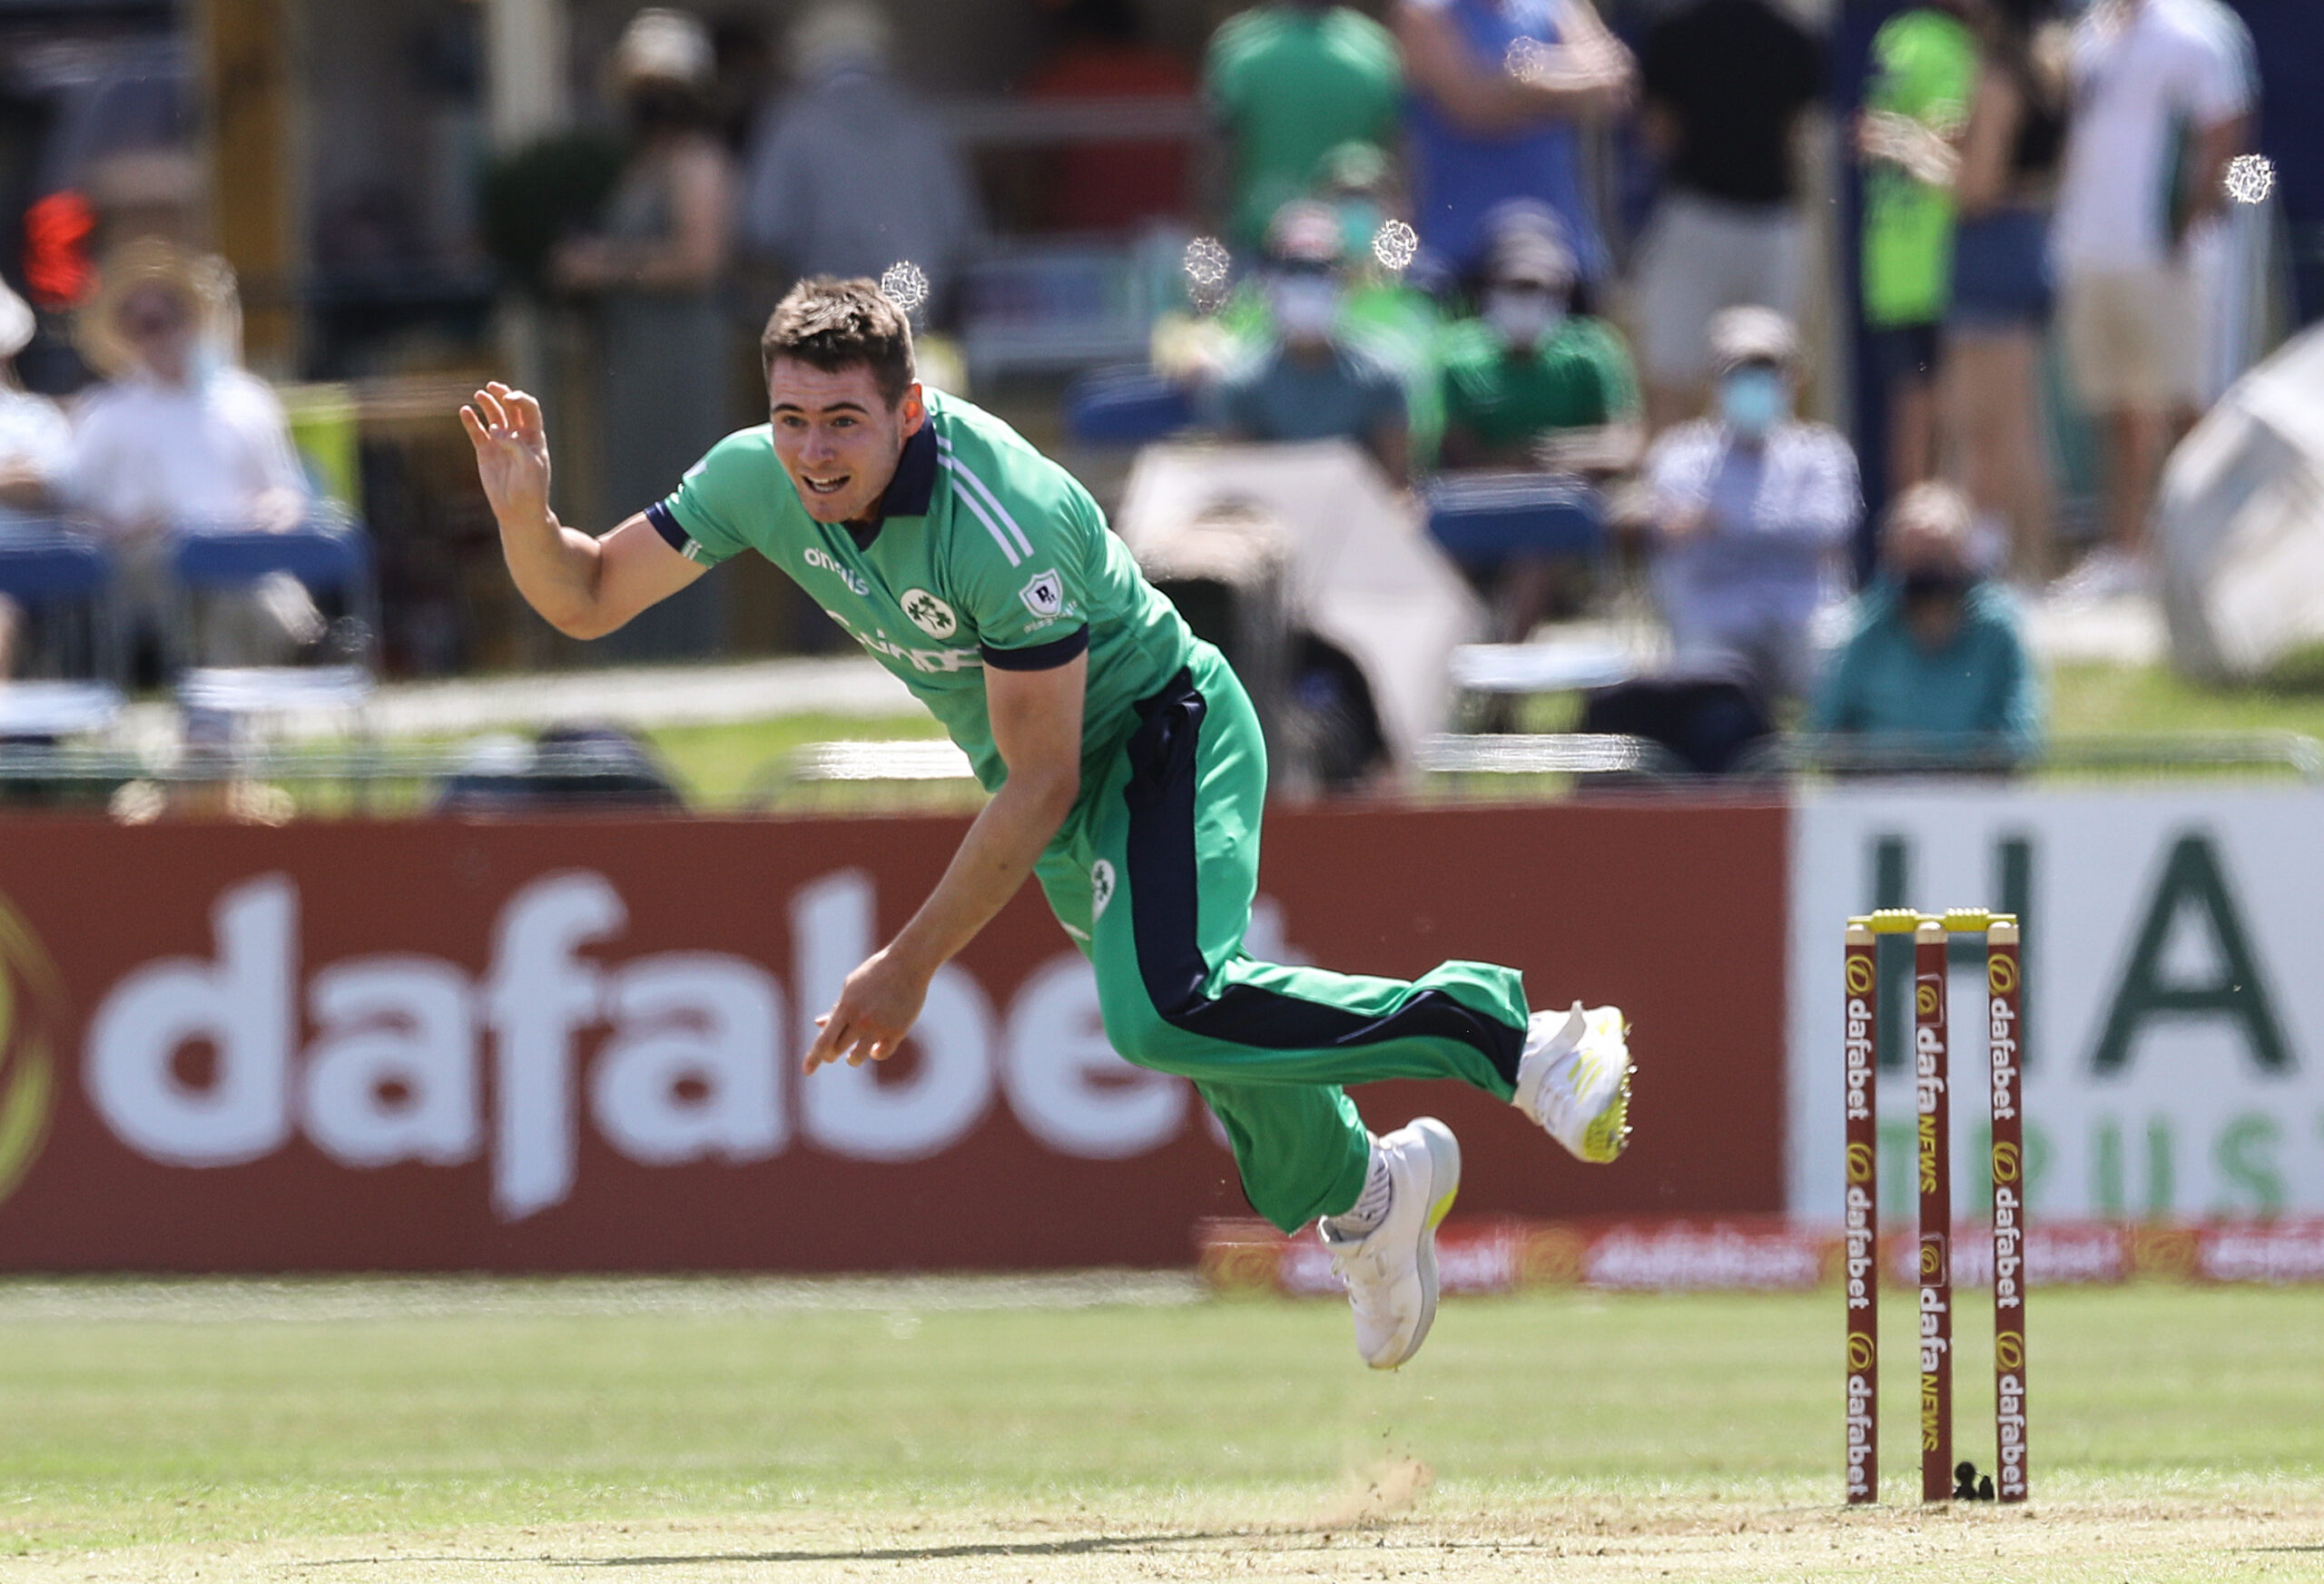 Ireland Cricketer Josh Little Fined For Breaching ICC Code Of Conduct; Teammates Mark Adair And Harry Tector Also Land In Trouble